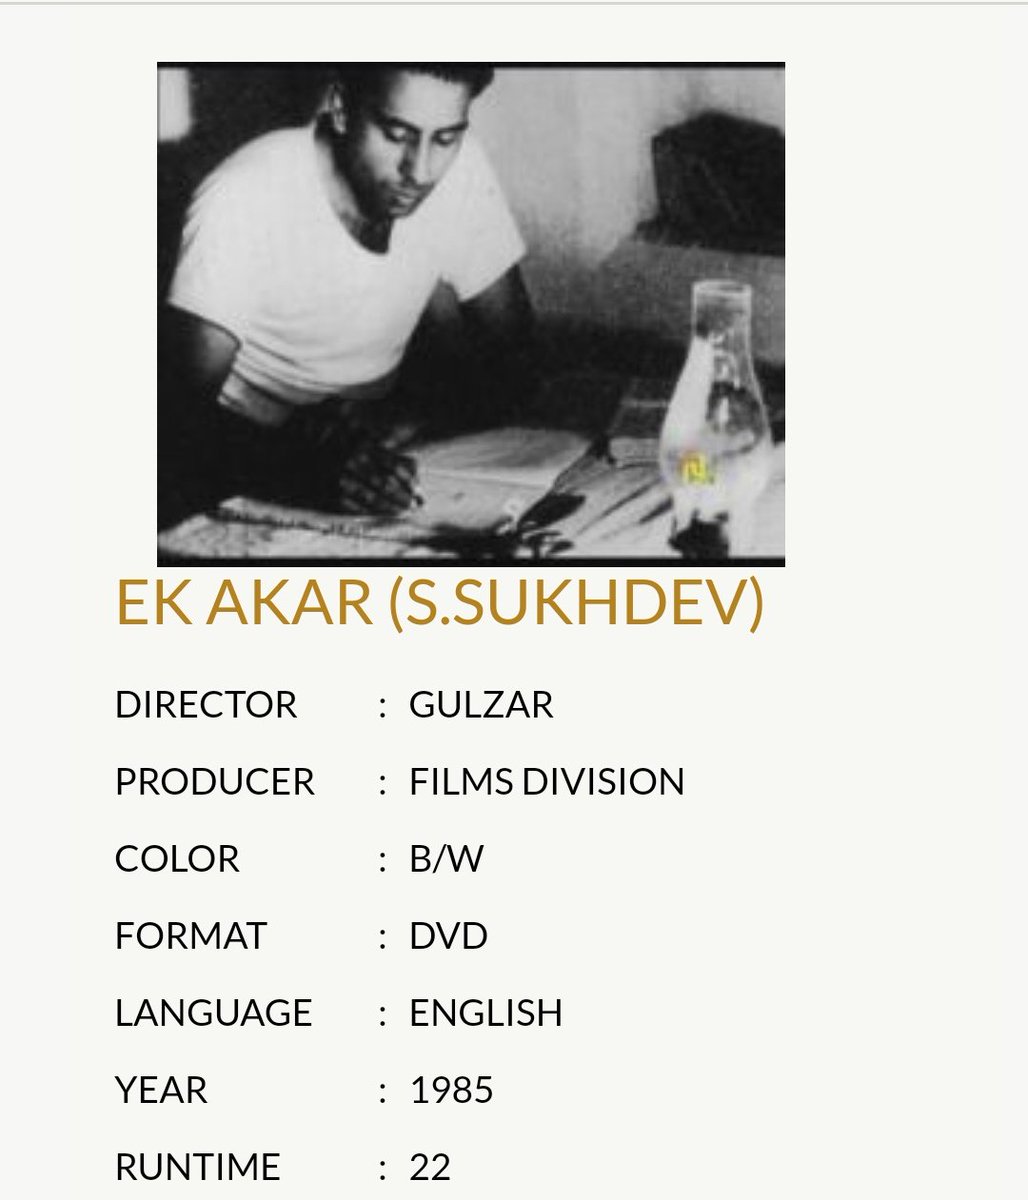 A short biographical feature dealing with the life and work of legendary documentary film maker - S. Sukhdev aka Sukh. #EKAkar (1985) by  #Gulzar. Streaming on the  @FilmsDivision channel on  @YouTubeIndia.Link: 